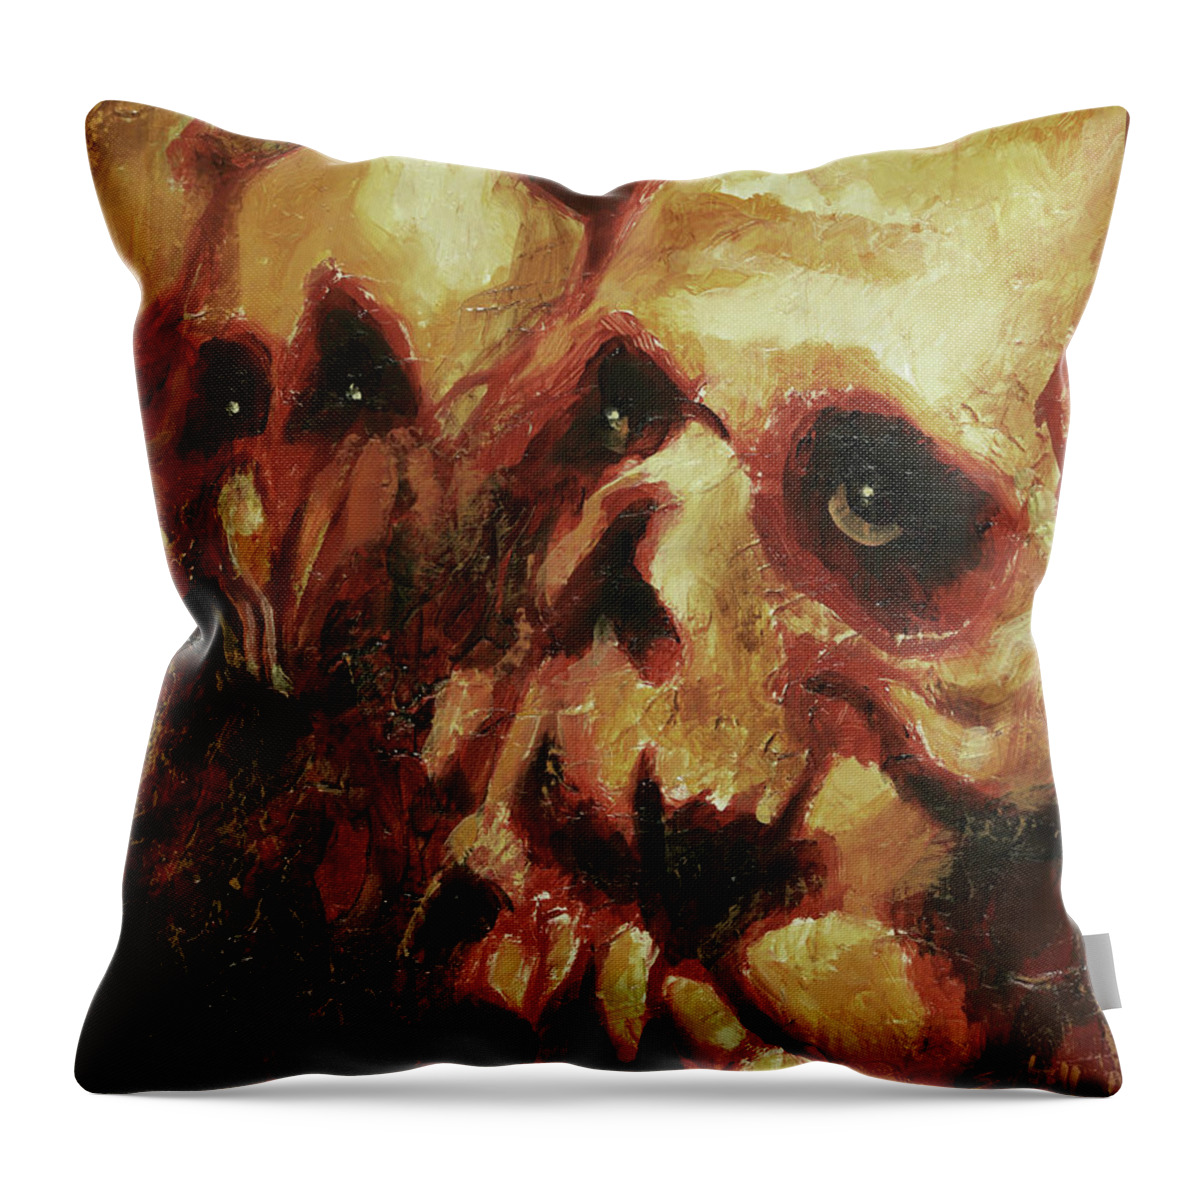 Skulls Throw Pillow featuring the painting La Petite Mort by Sv Bell